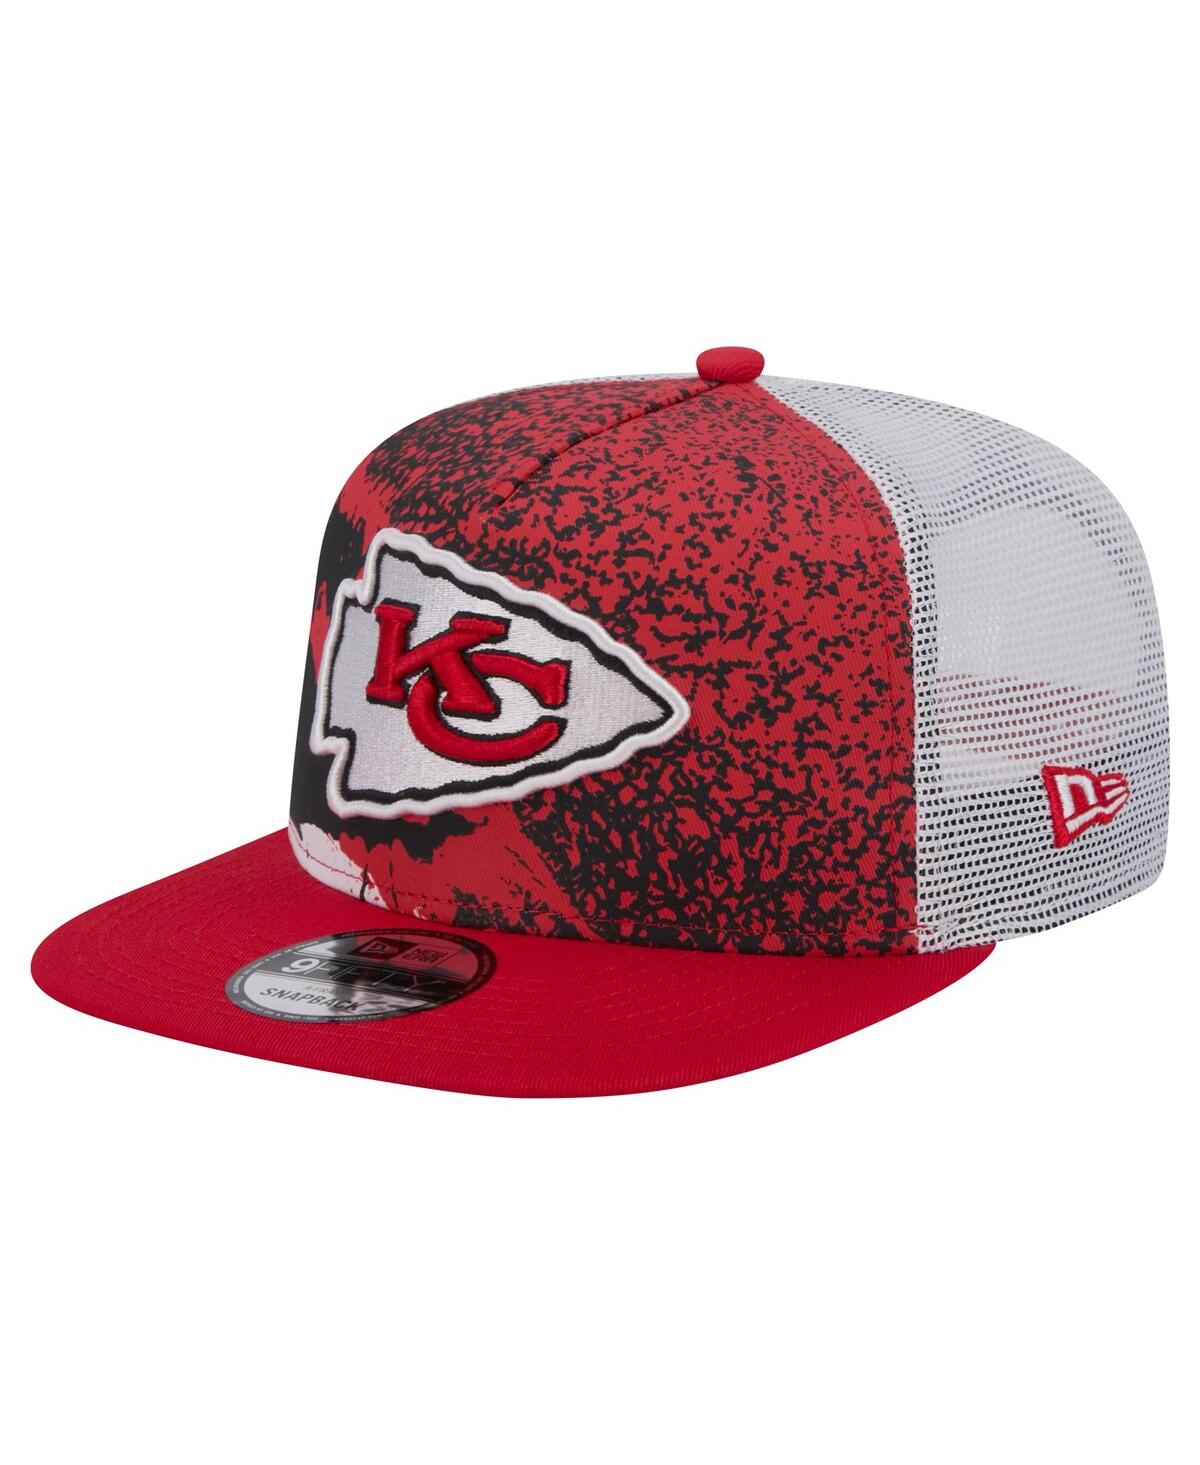 Men's Red Kansas City Chiefs Court Sport 9Fifty Snapback Hat - Red Black